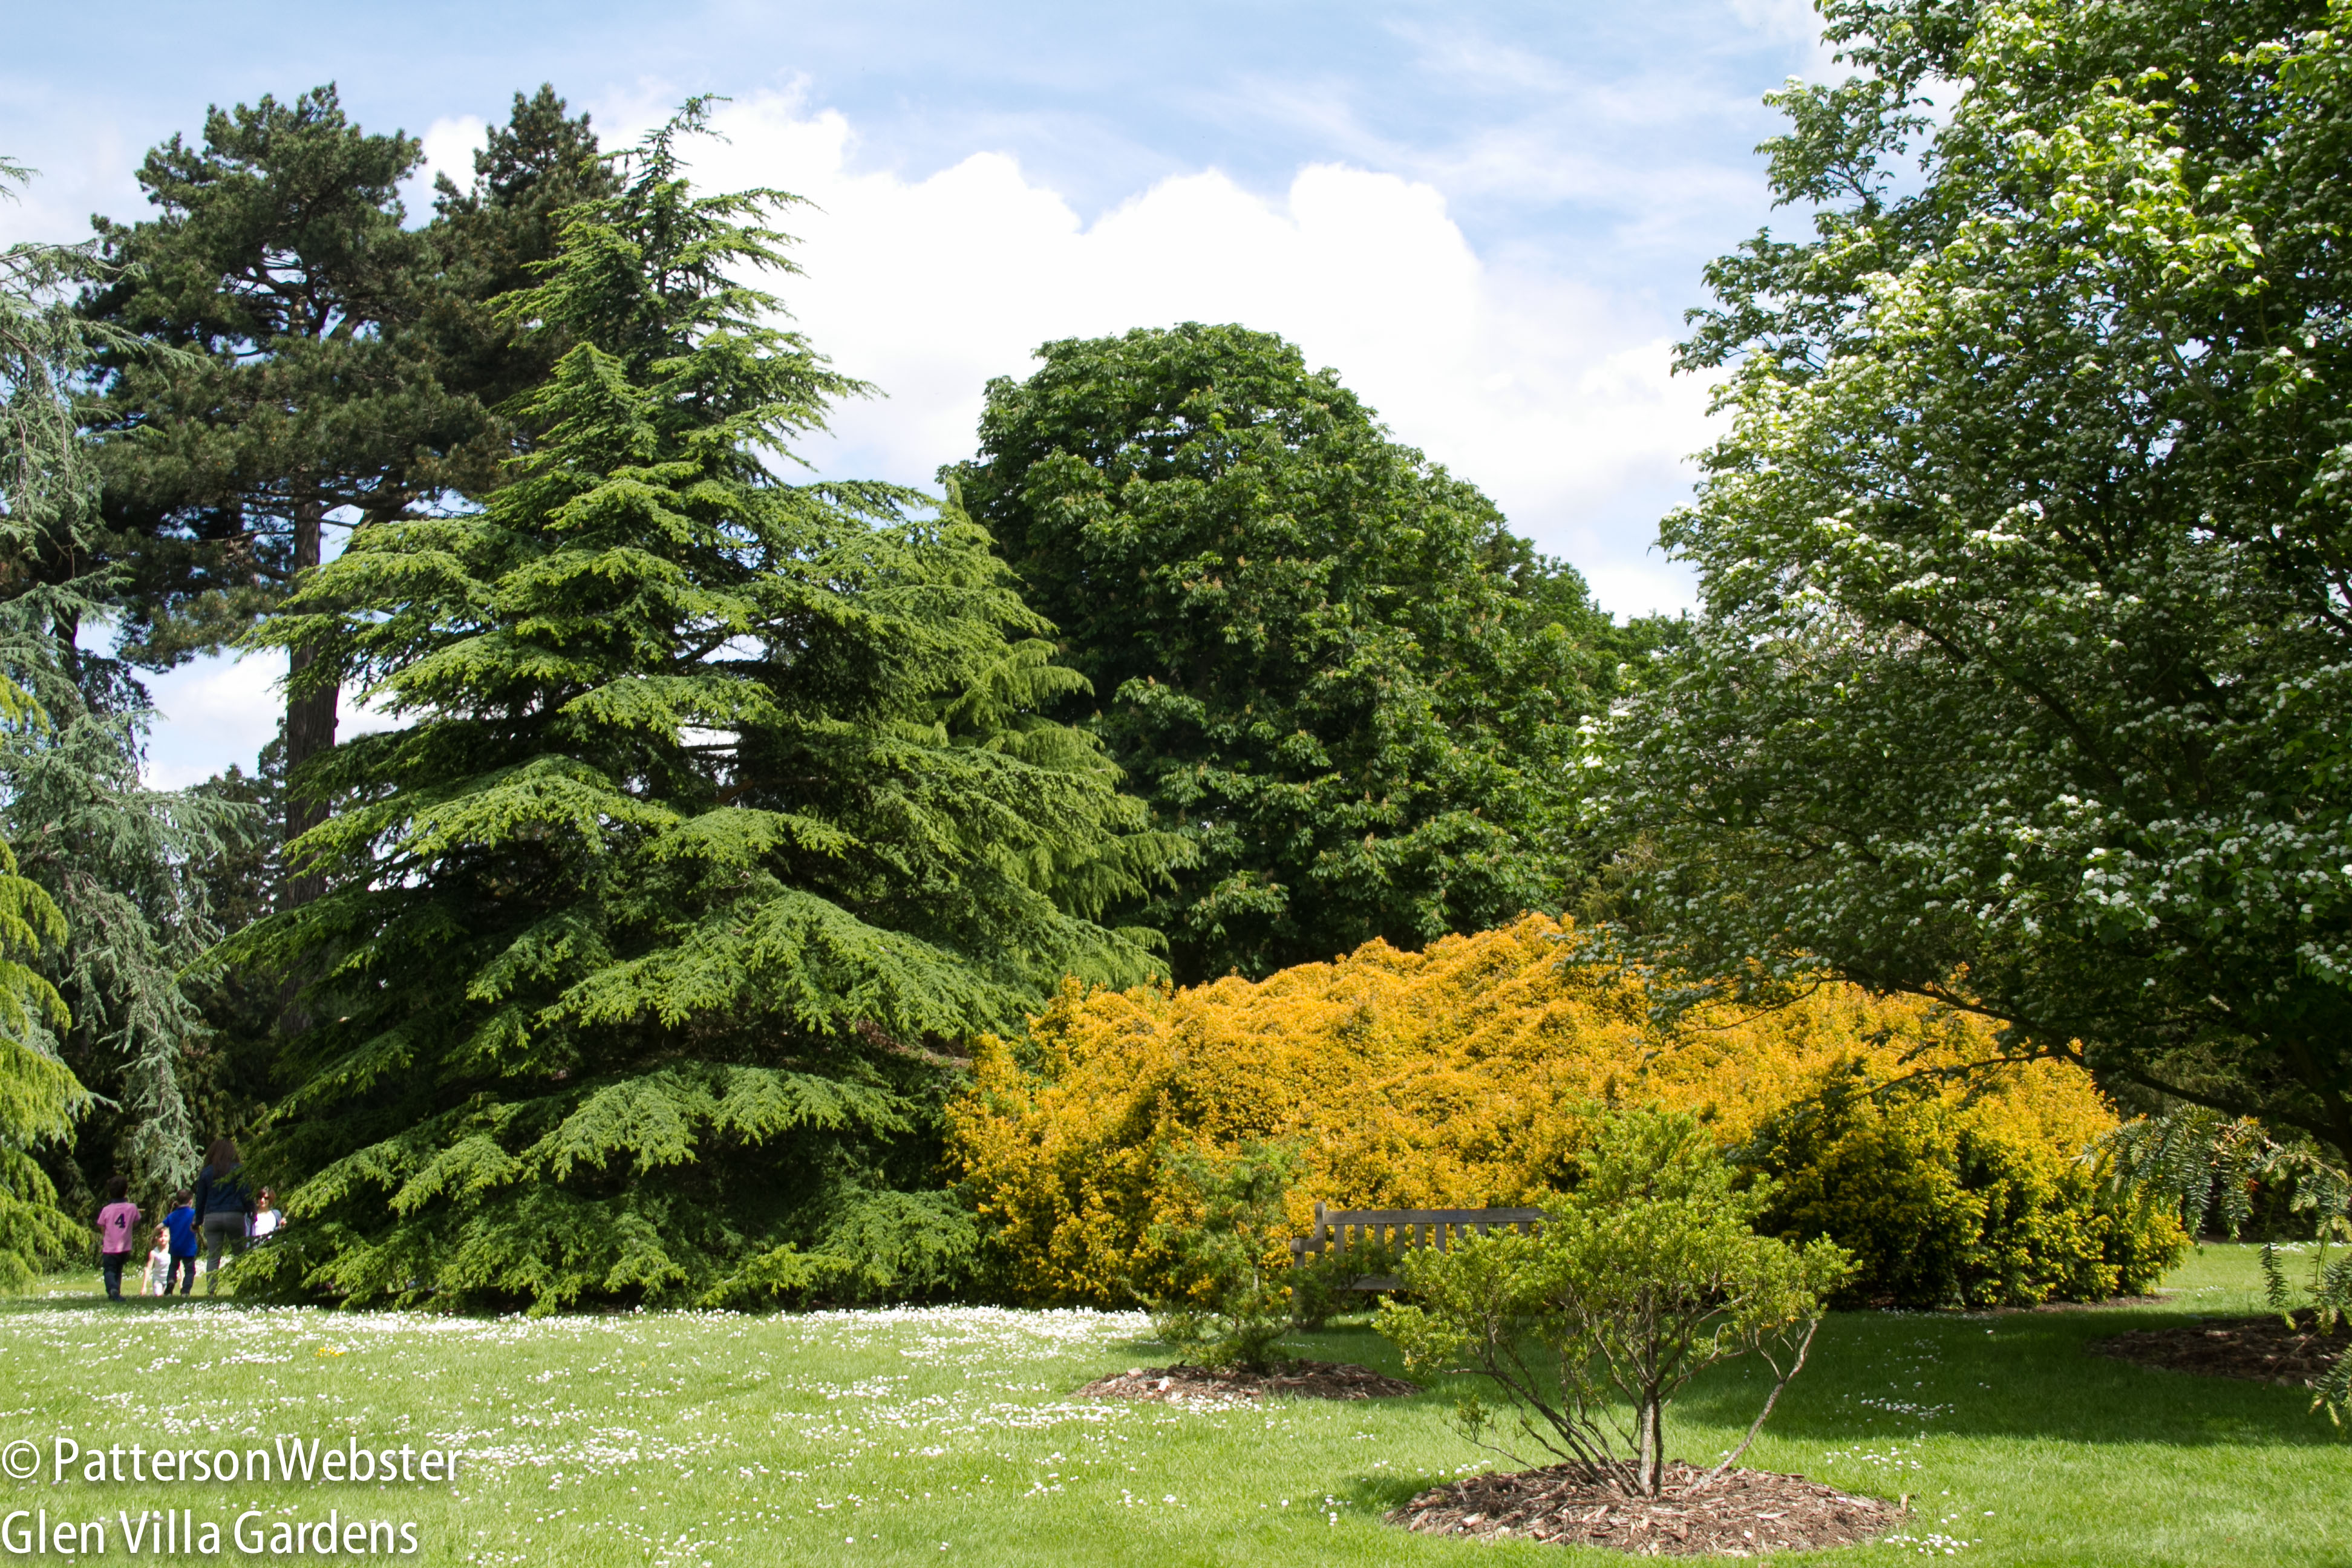 A scene from the pinetum area at Kew Gardens shows a mix of foliage colours and a bright blue sky.